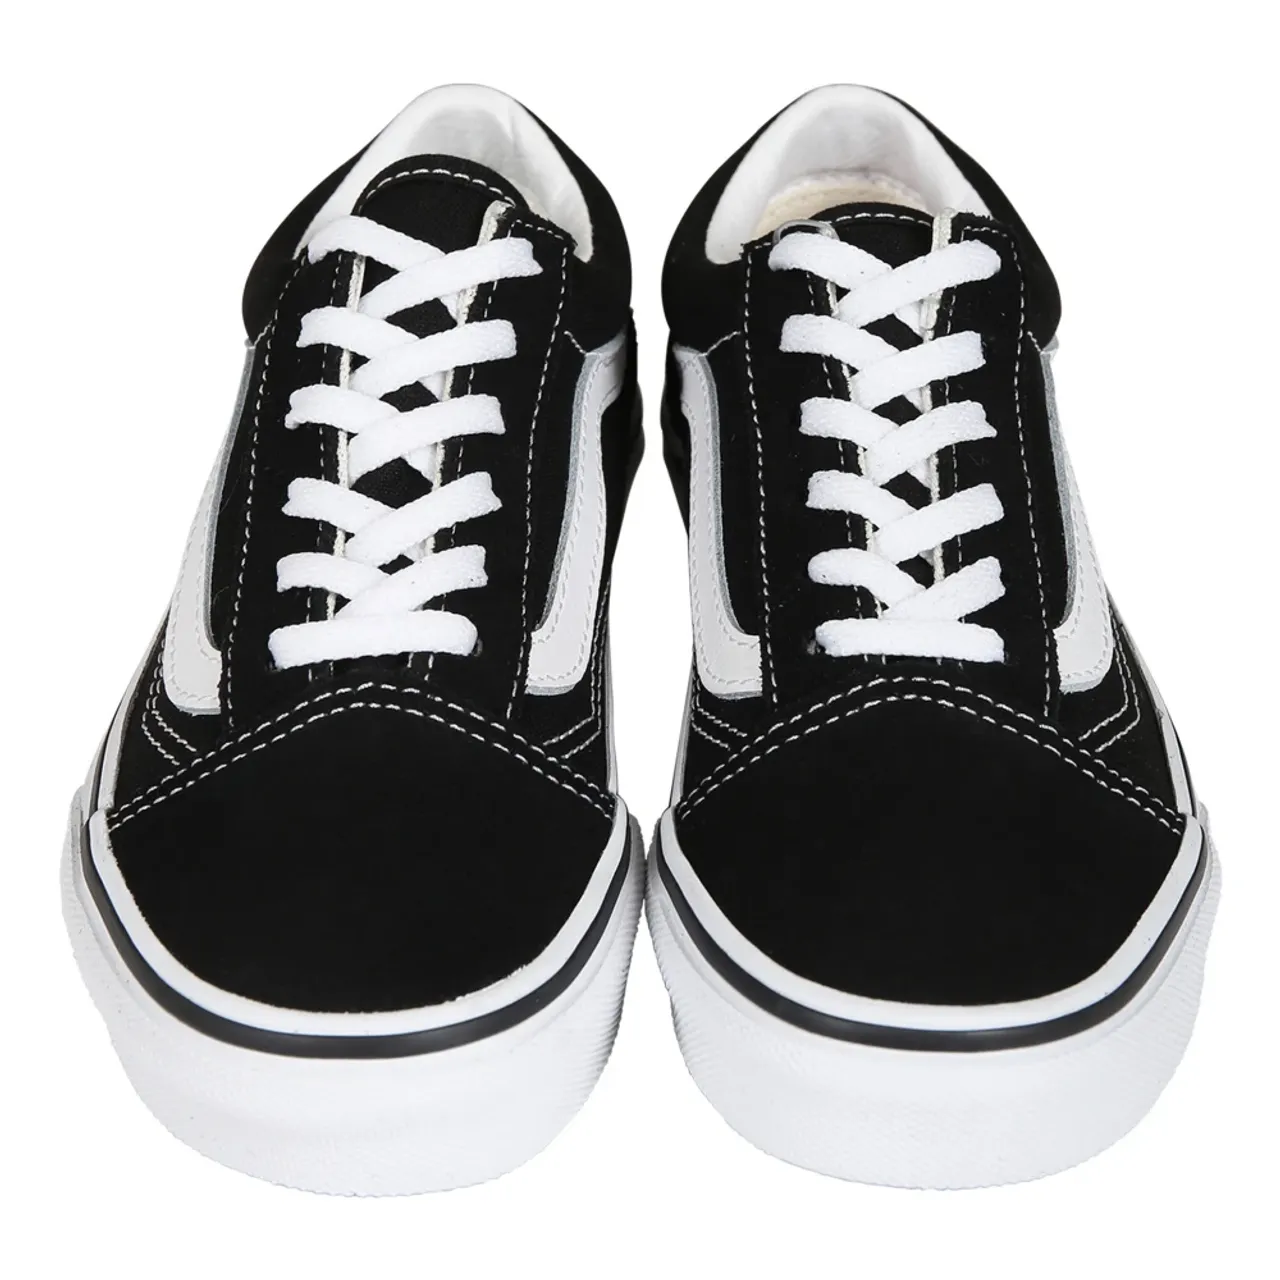 Vans , Black Leather and Textile Sneakers ,Black unisex, Sizes: